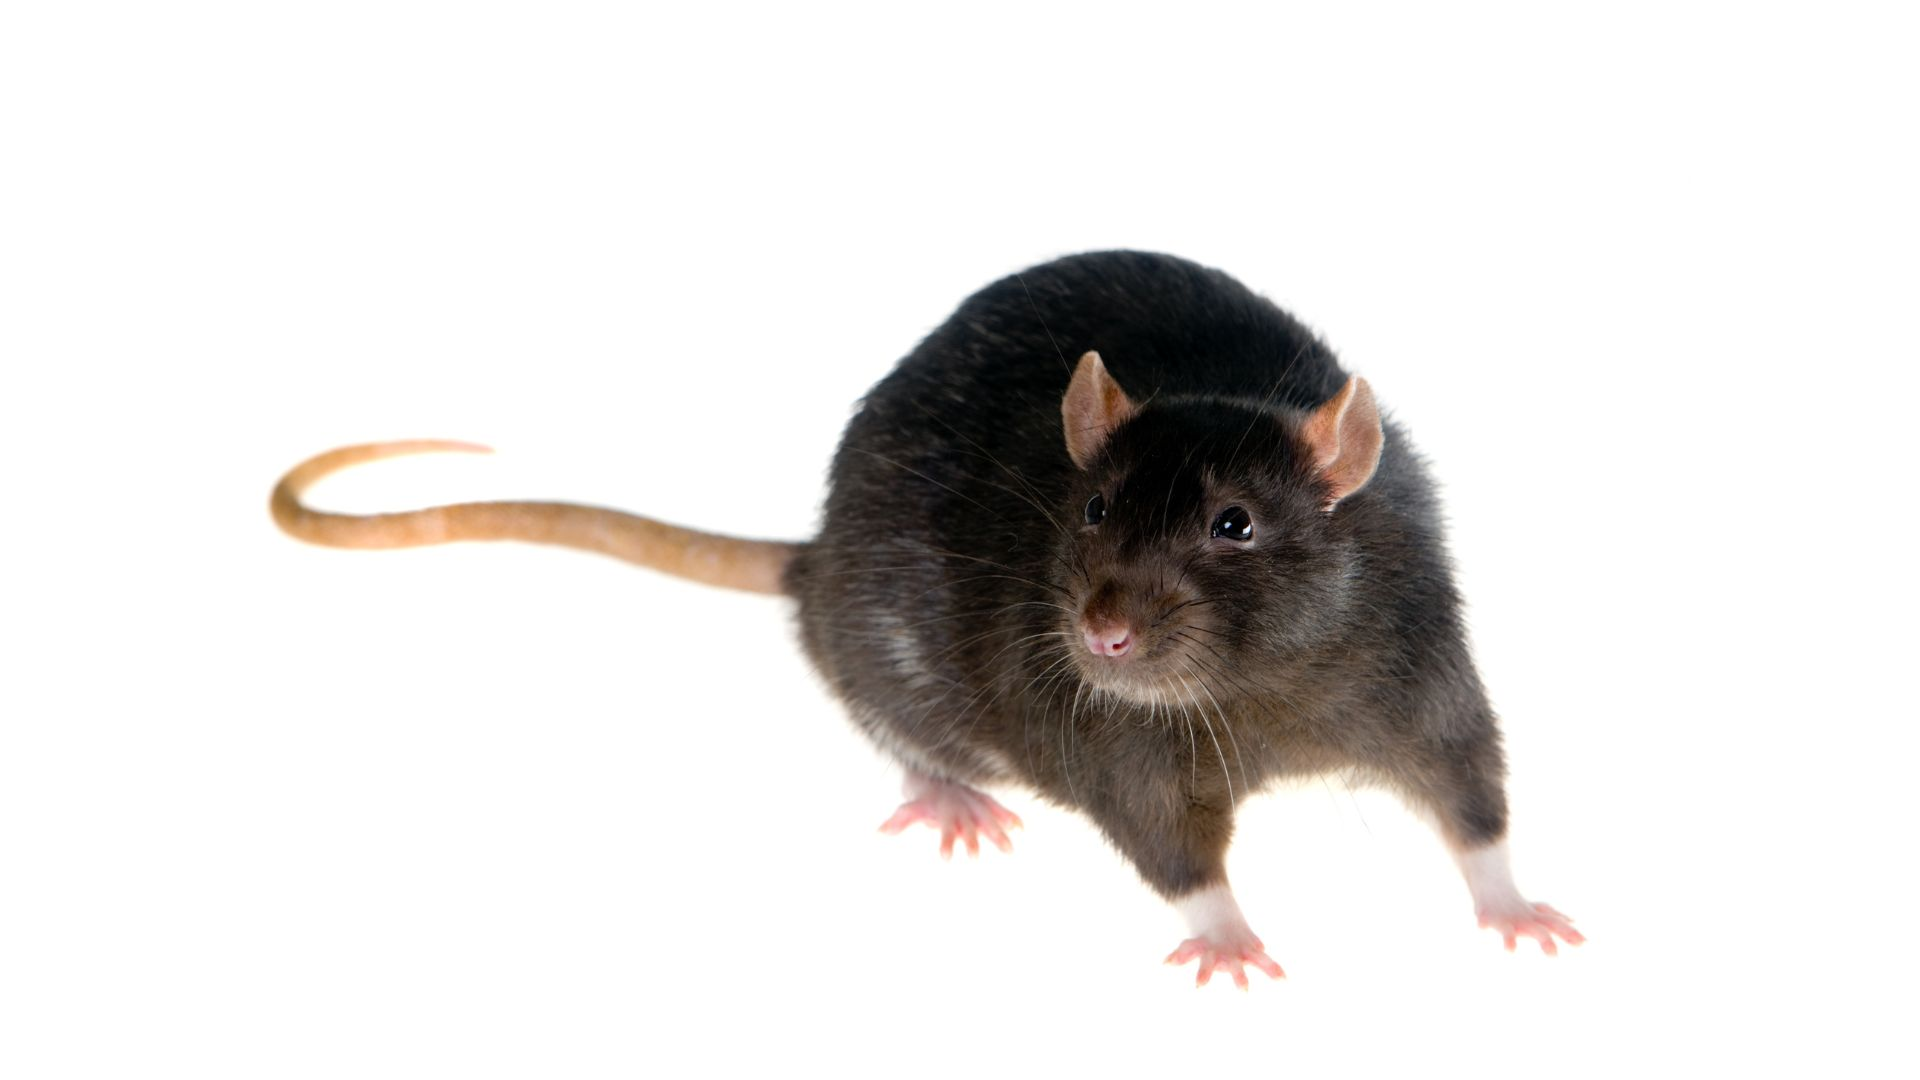 An image of a black rat on a white background.